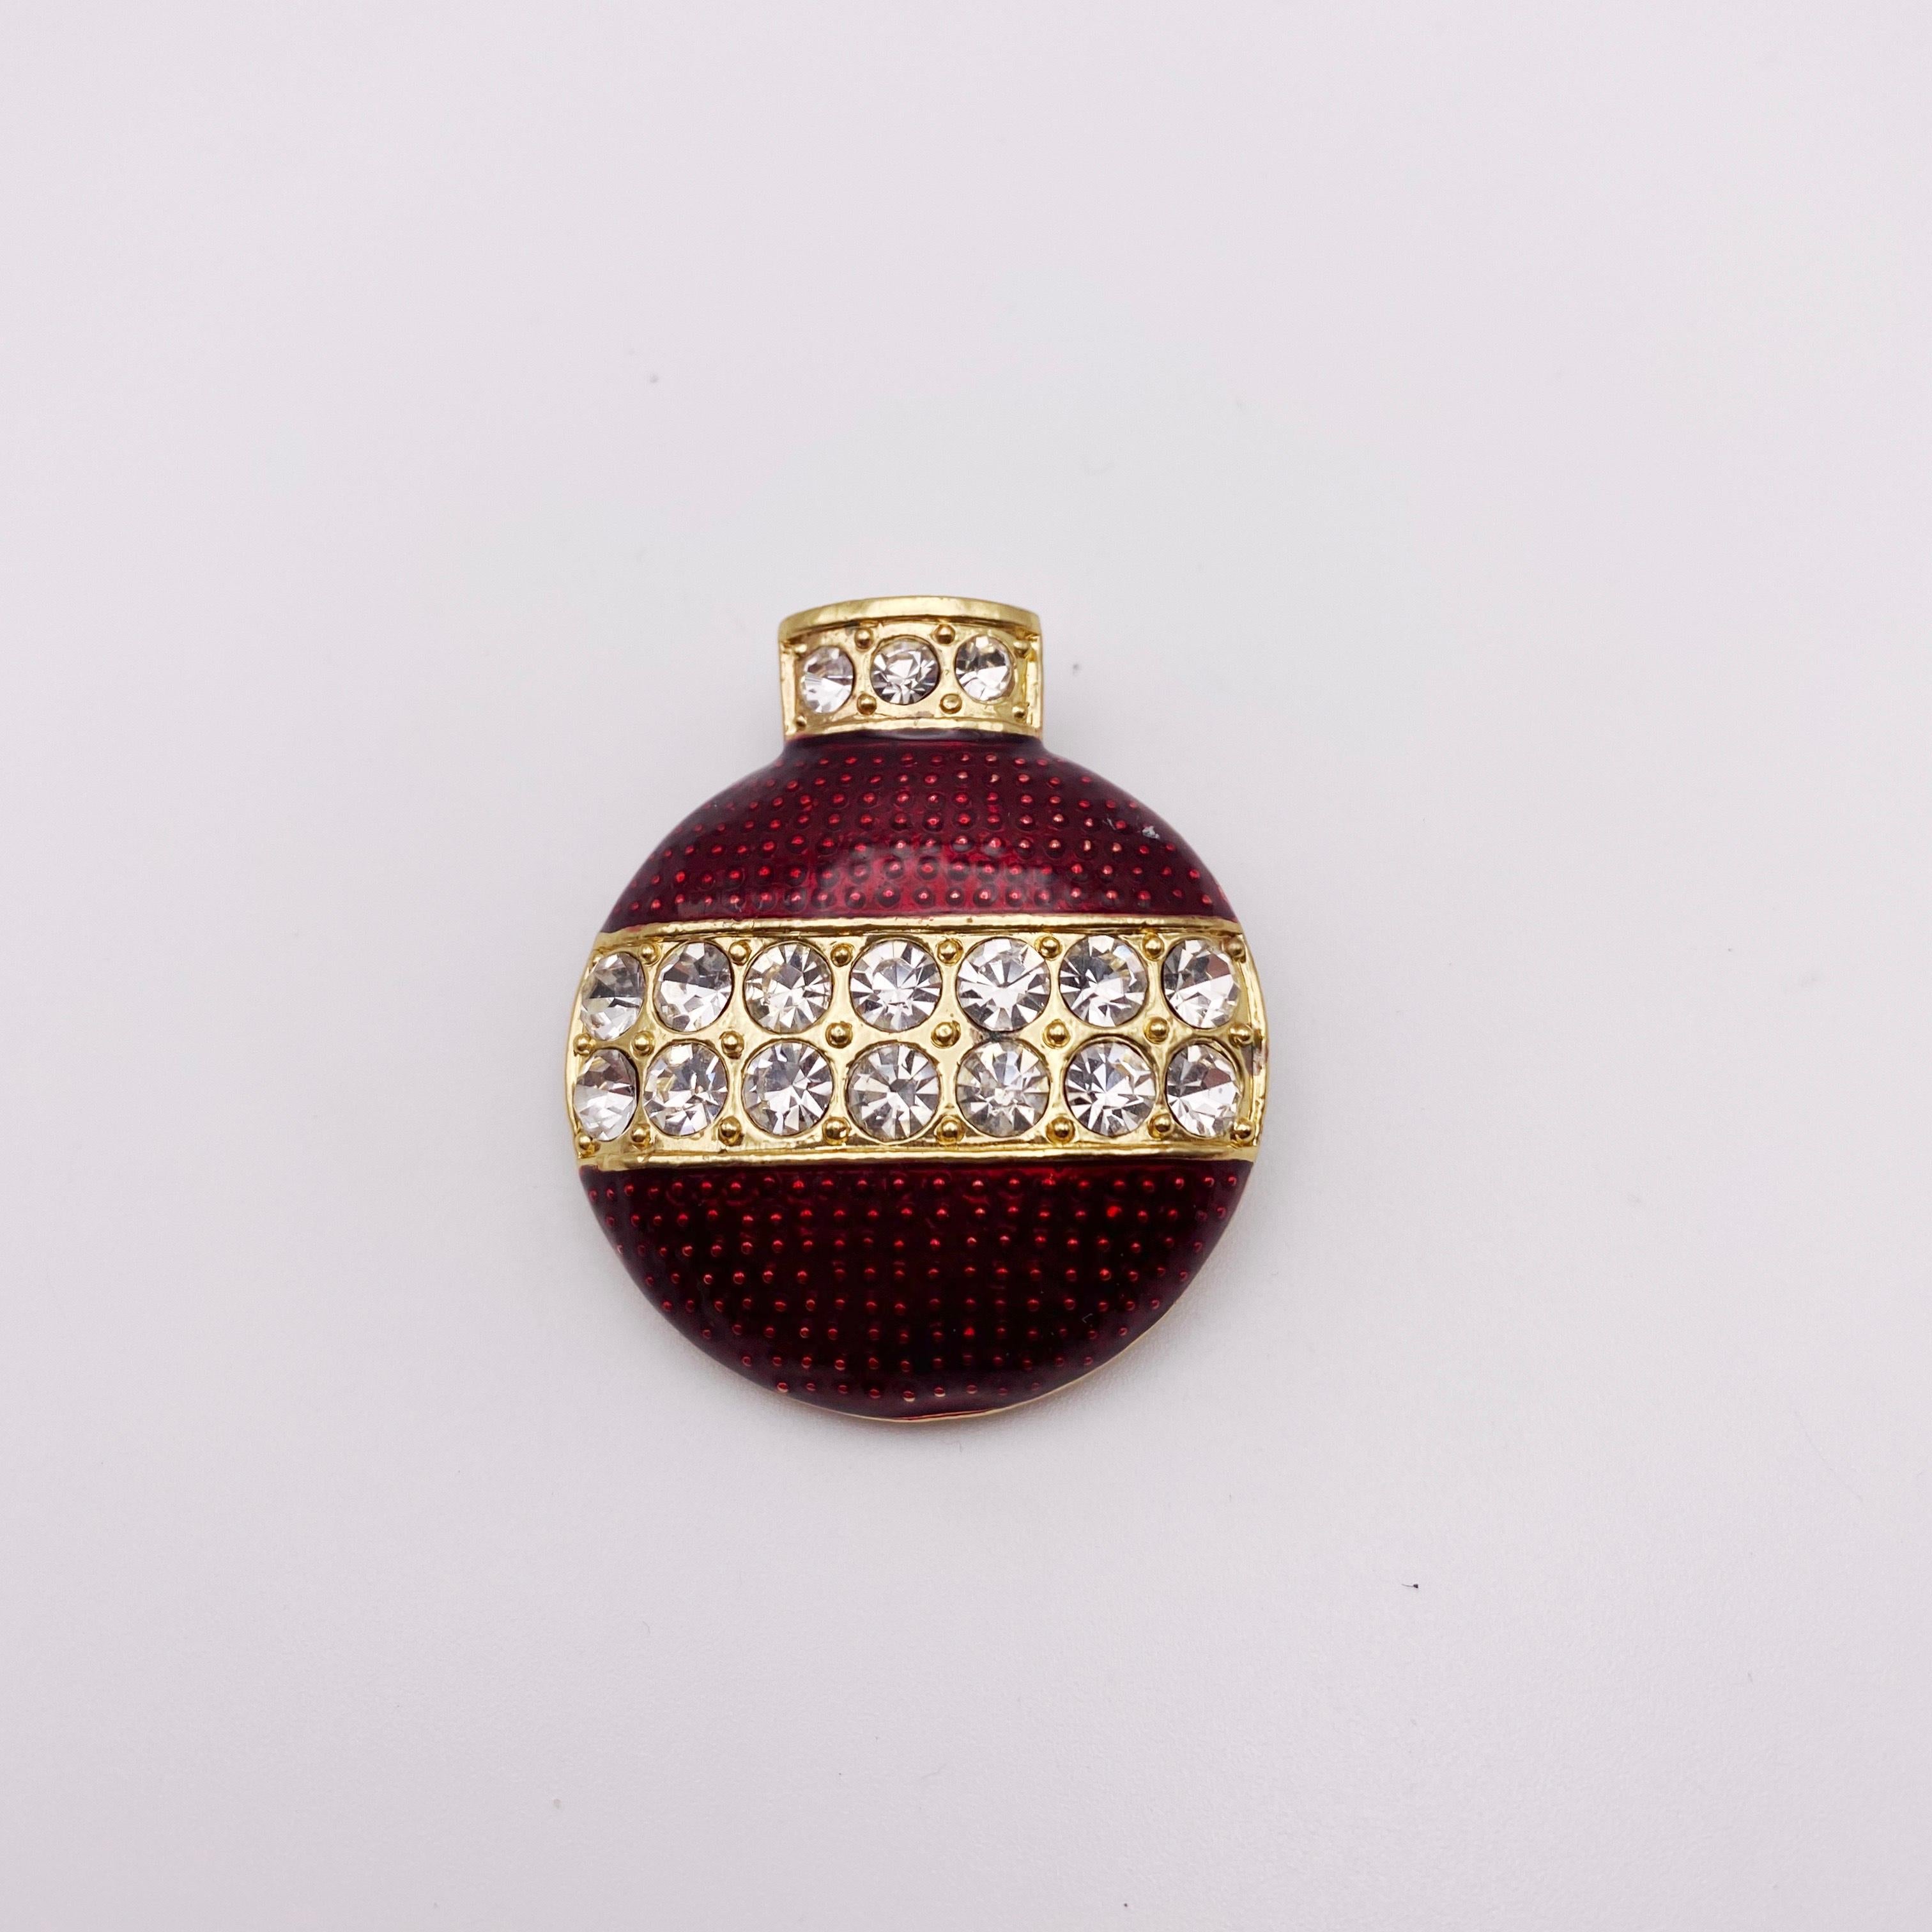 A beautiful Christmas bauble brooch by Eisenberg Ice. Circa, 1970s. Featuring red enamel with Swarovski crystals, set in gold plating.  

According to Judith Miller, Eisenberg costume jewellery is a favourite among collectors. Originally a clothing